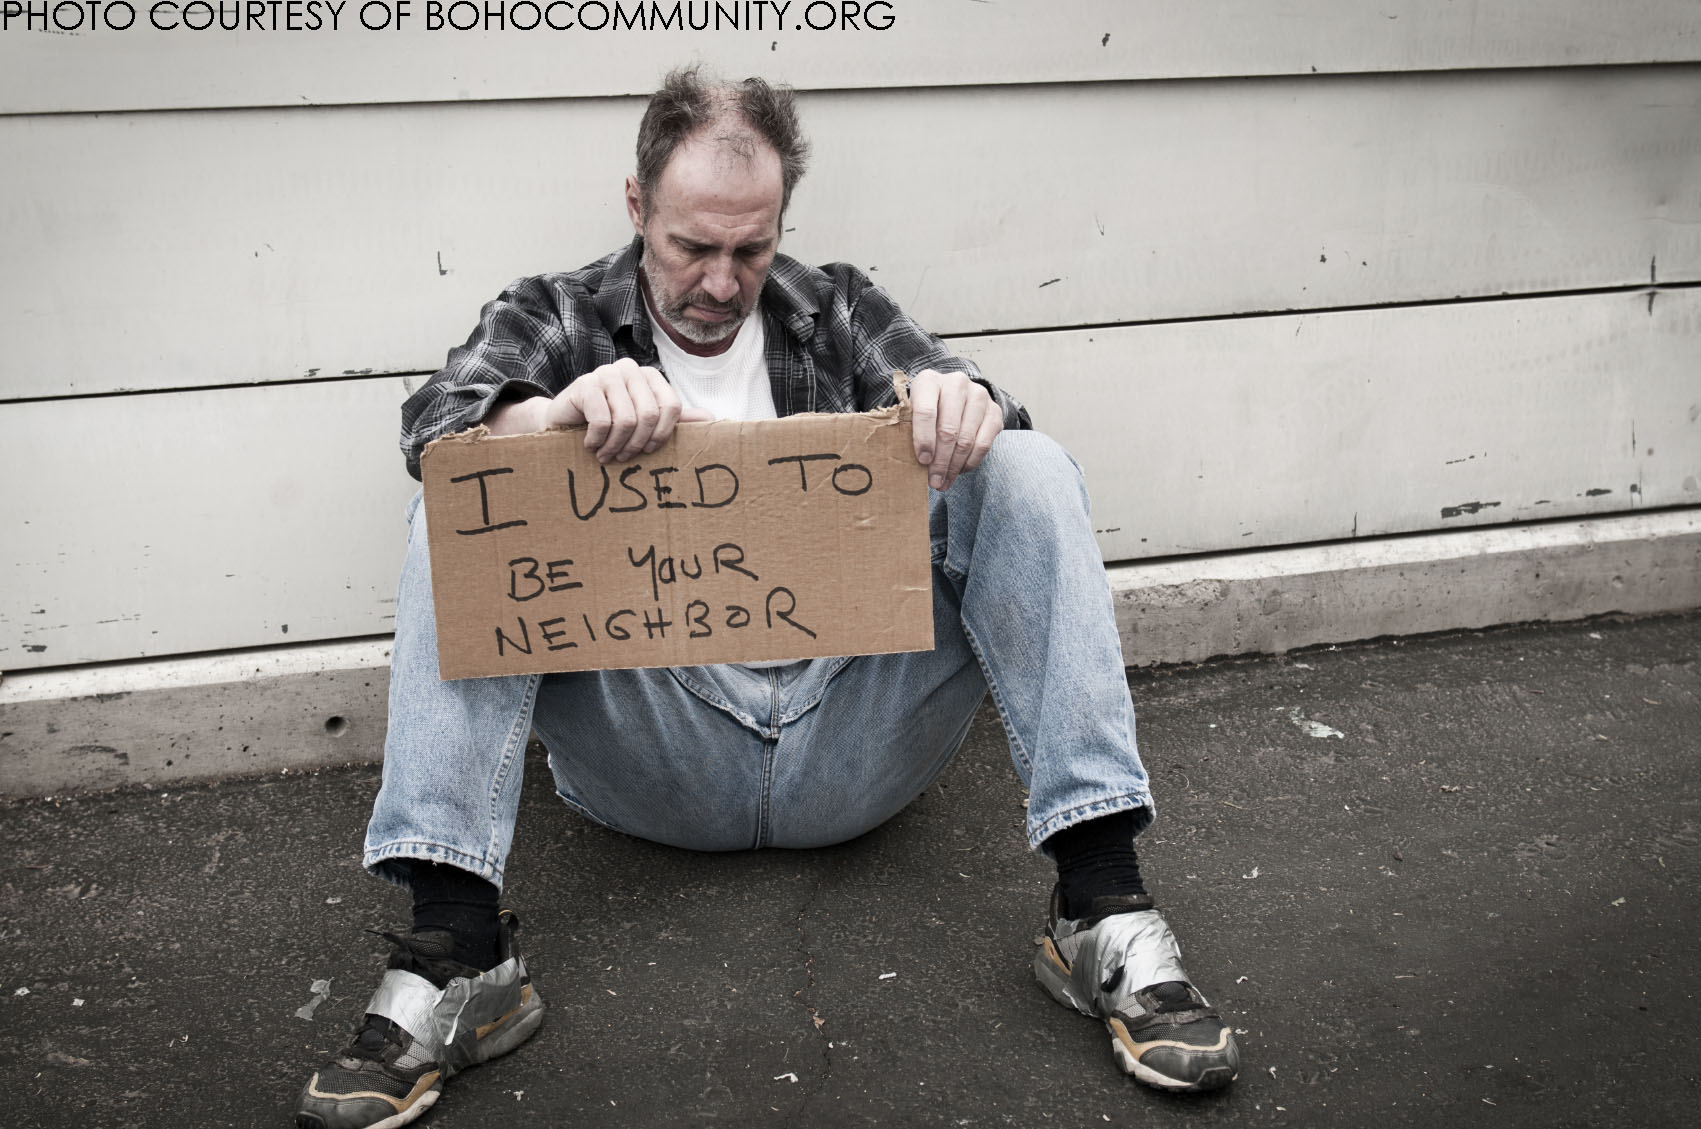 Homeless People Are Pretty Much Just Like You And Me